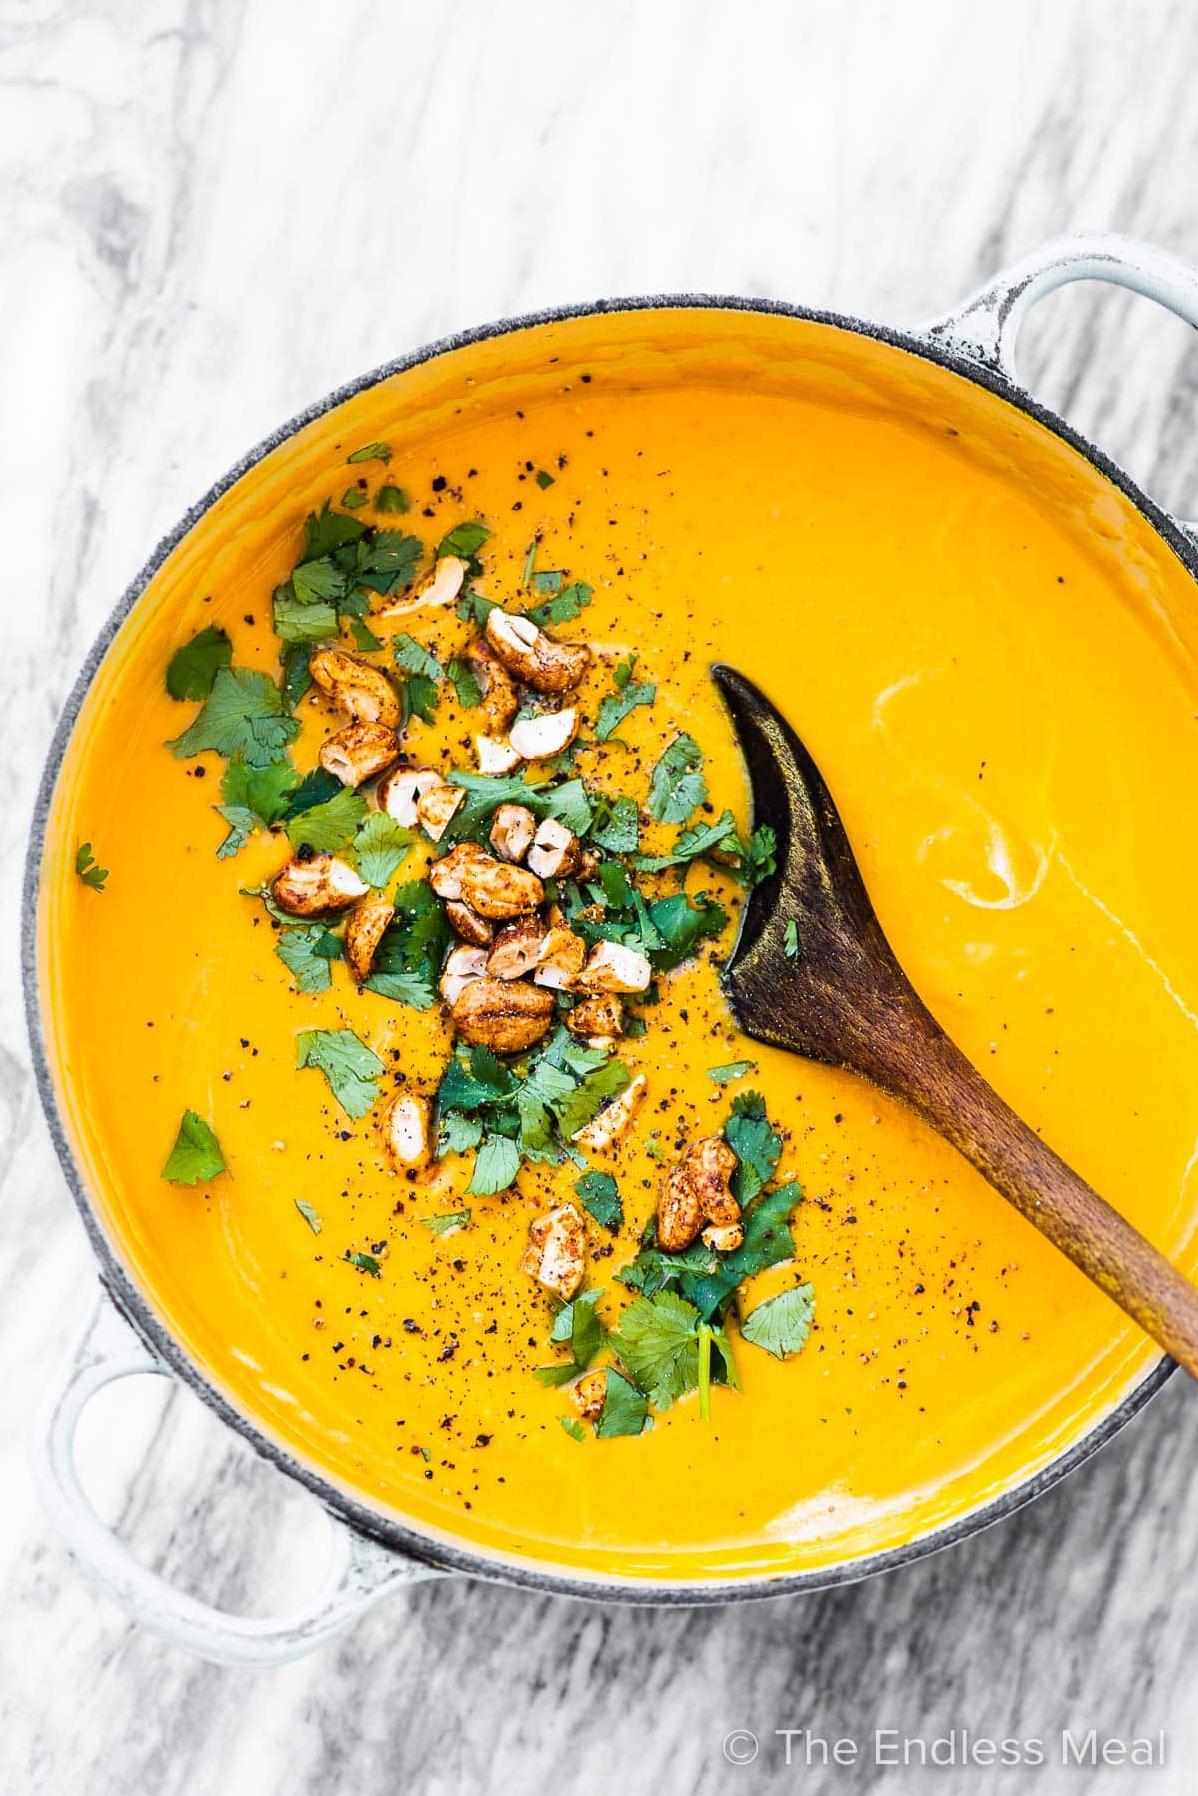  Cozy up with a bowl of this vibrant orange soup on a chilly evening.